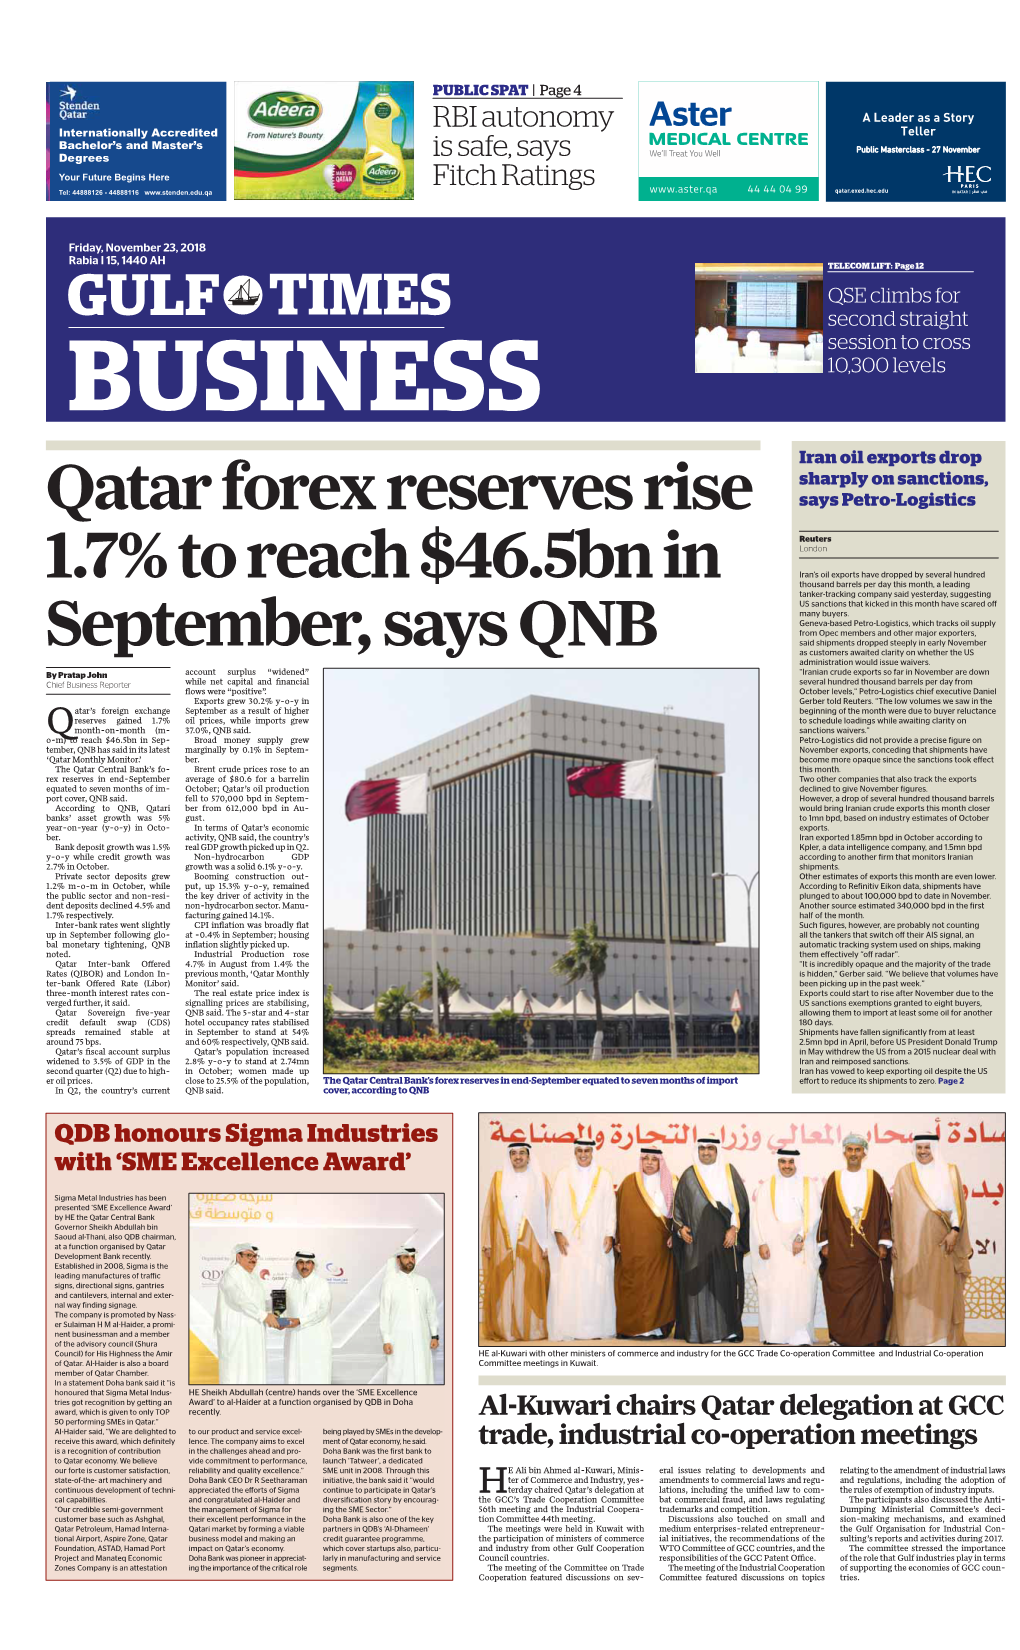 Qatar Forex Reserves Rise 1.7% to Reach $46.5Bn in September, Says